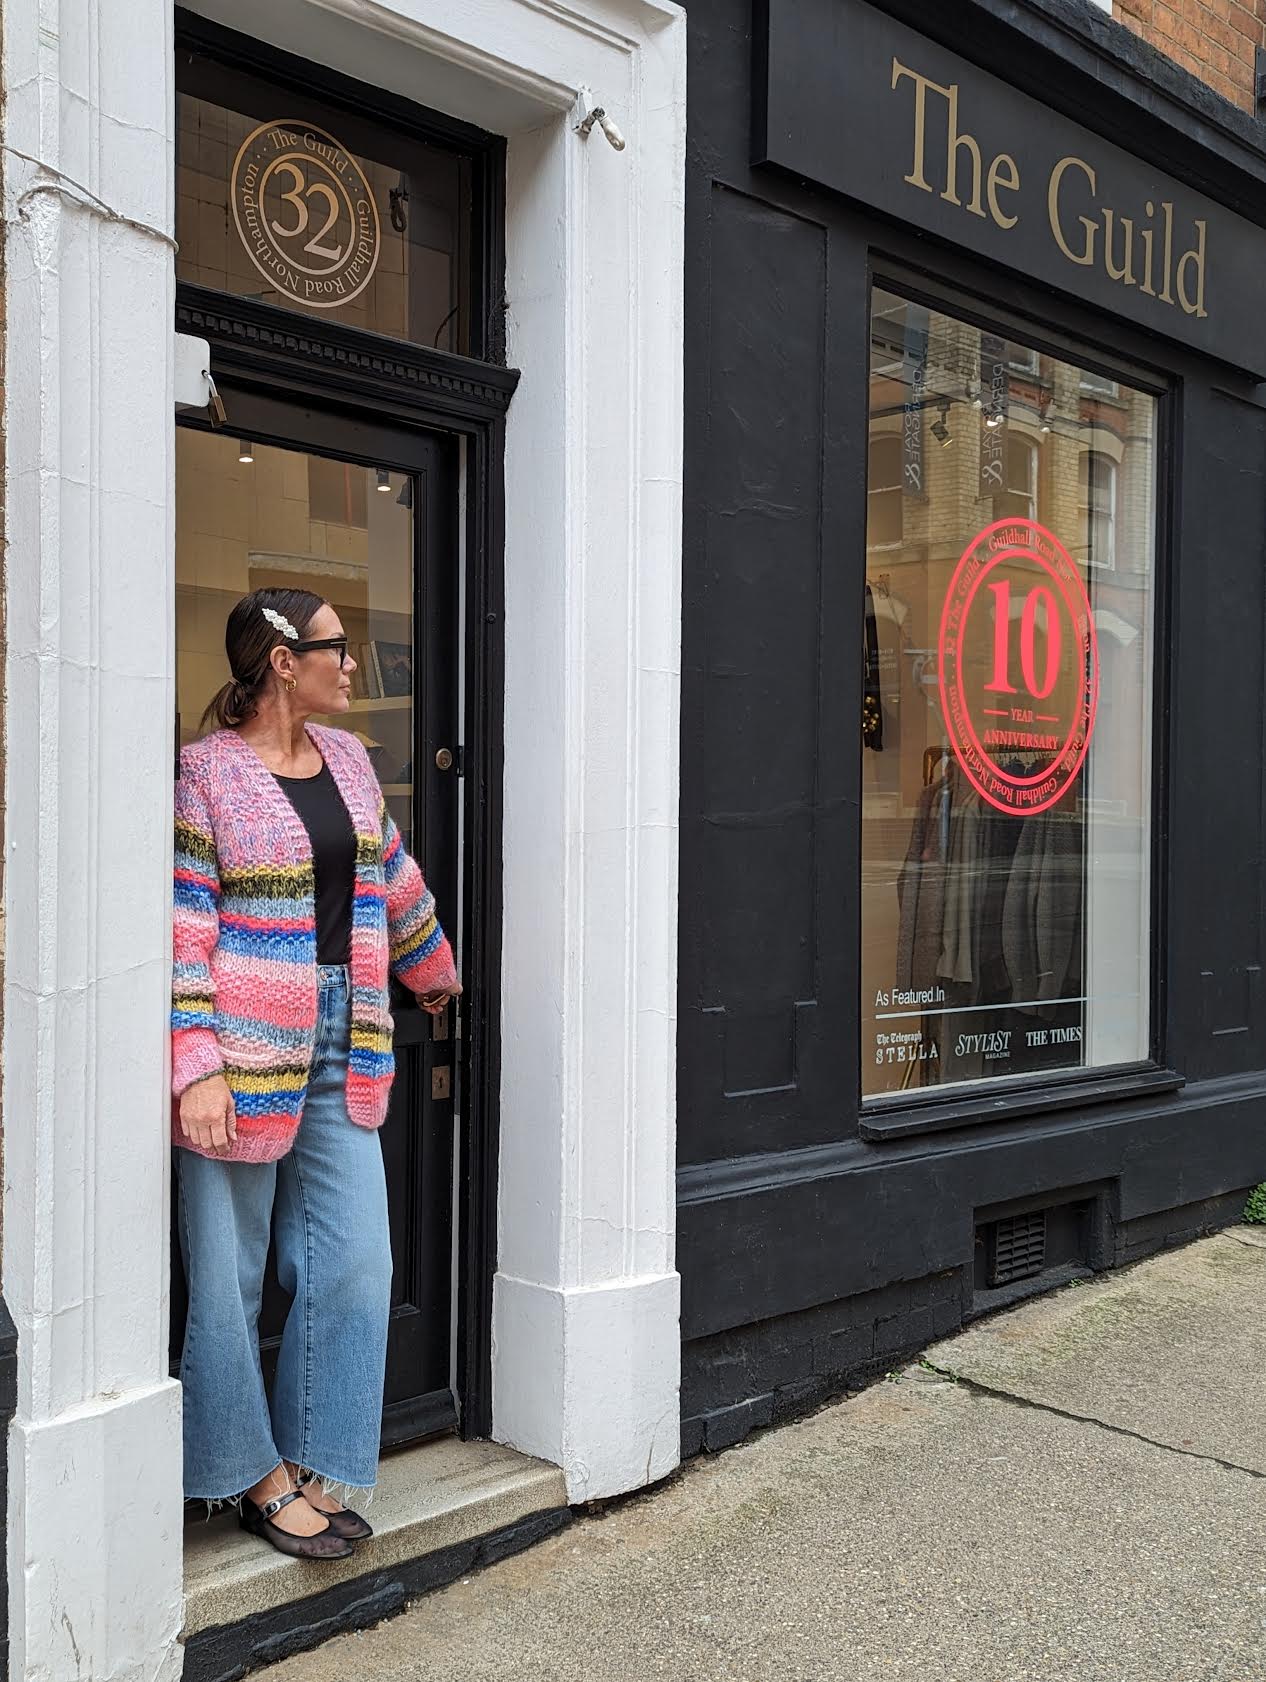 DawnxDare - Mars Pink & Blue Multi-Coloured Cardigan worn with Frame Jeans outside 32 The Guild